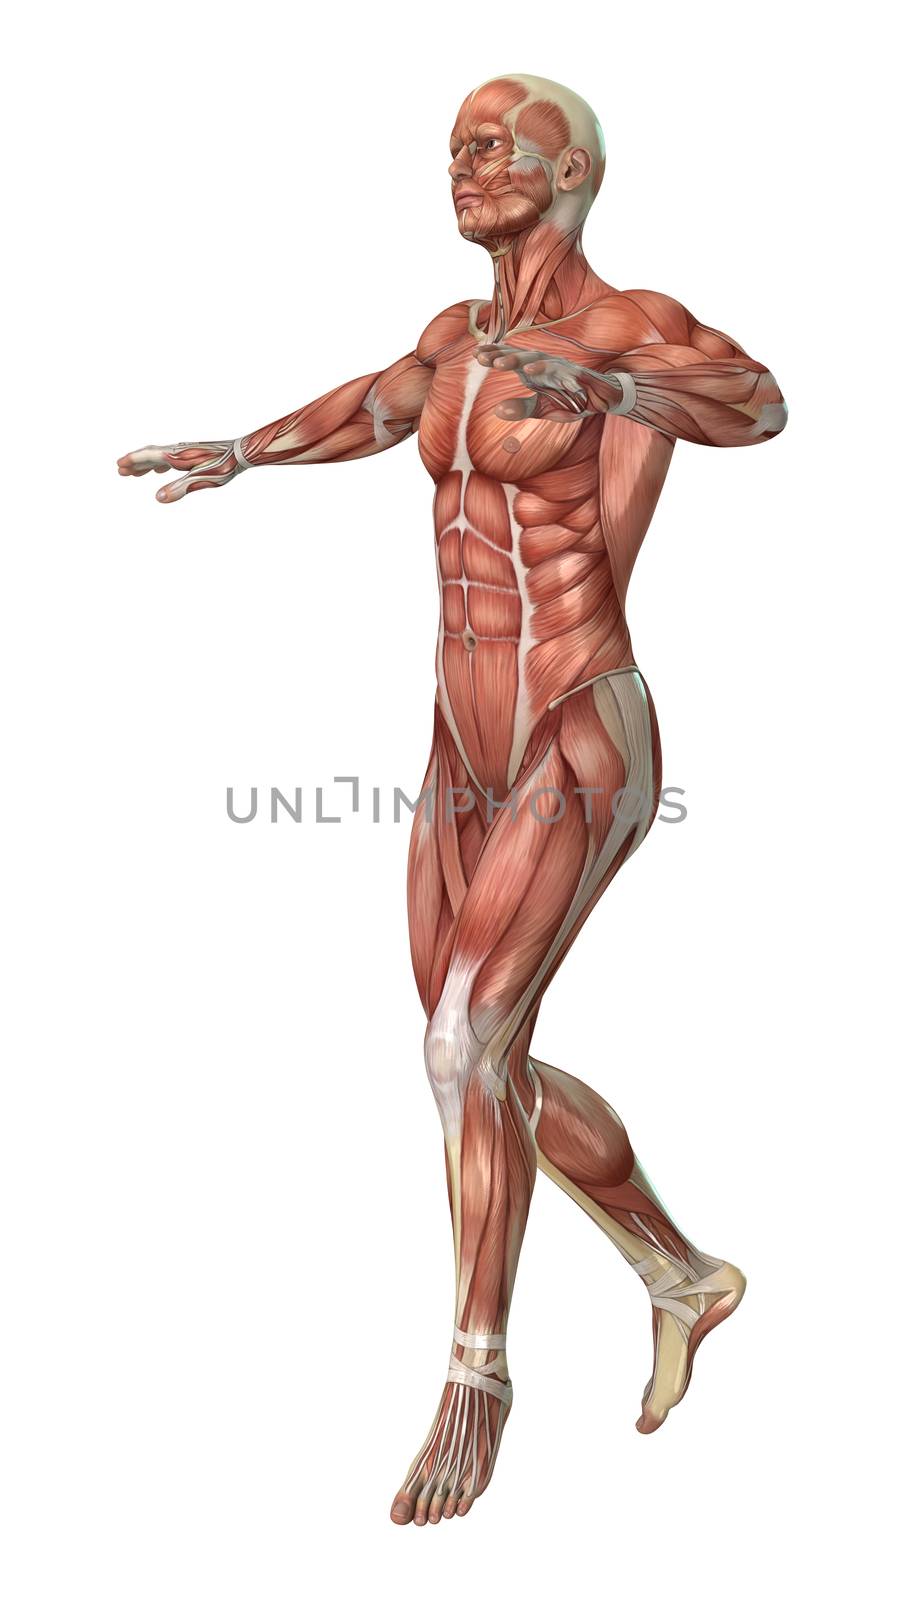 3D digital render of a male figure with muscle maps isolated on white background